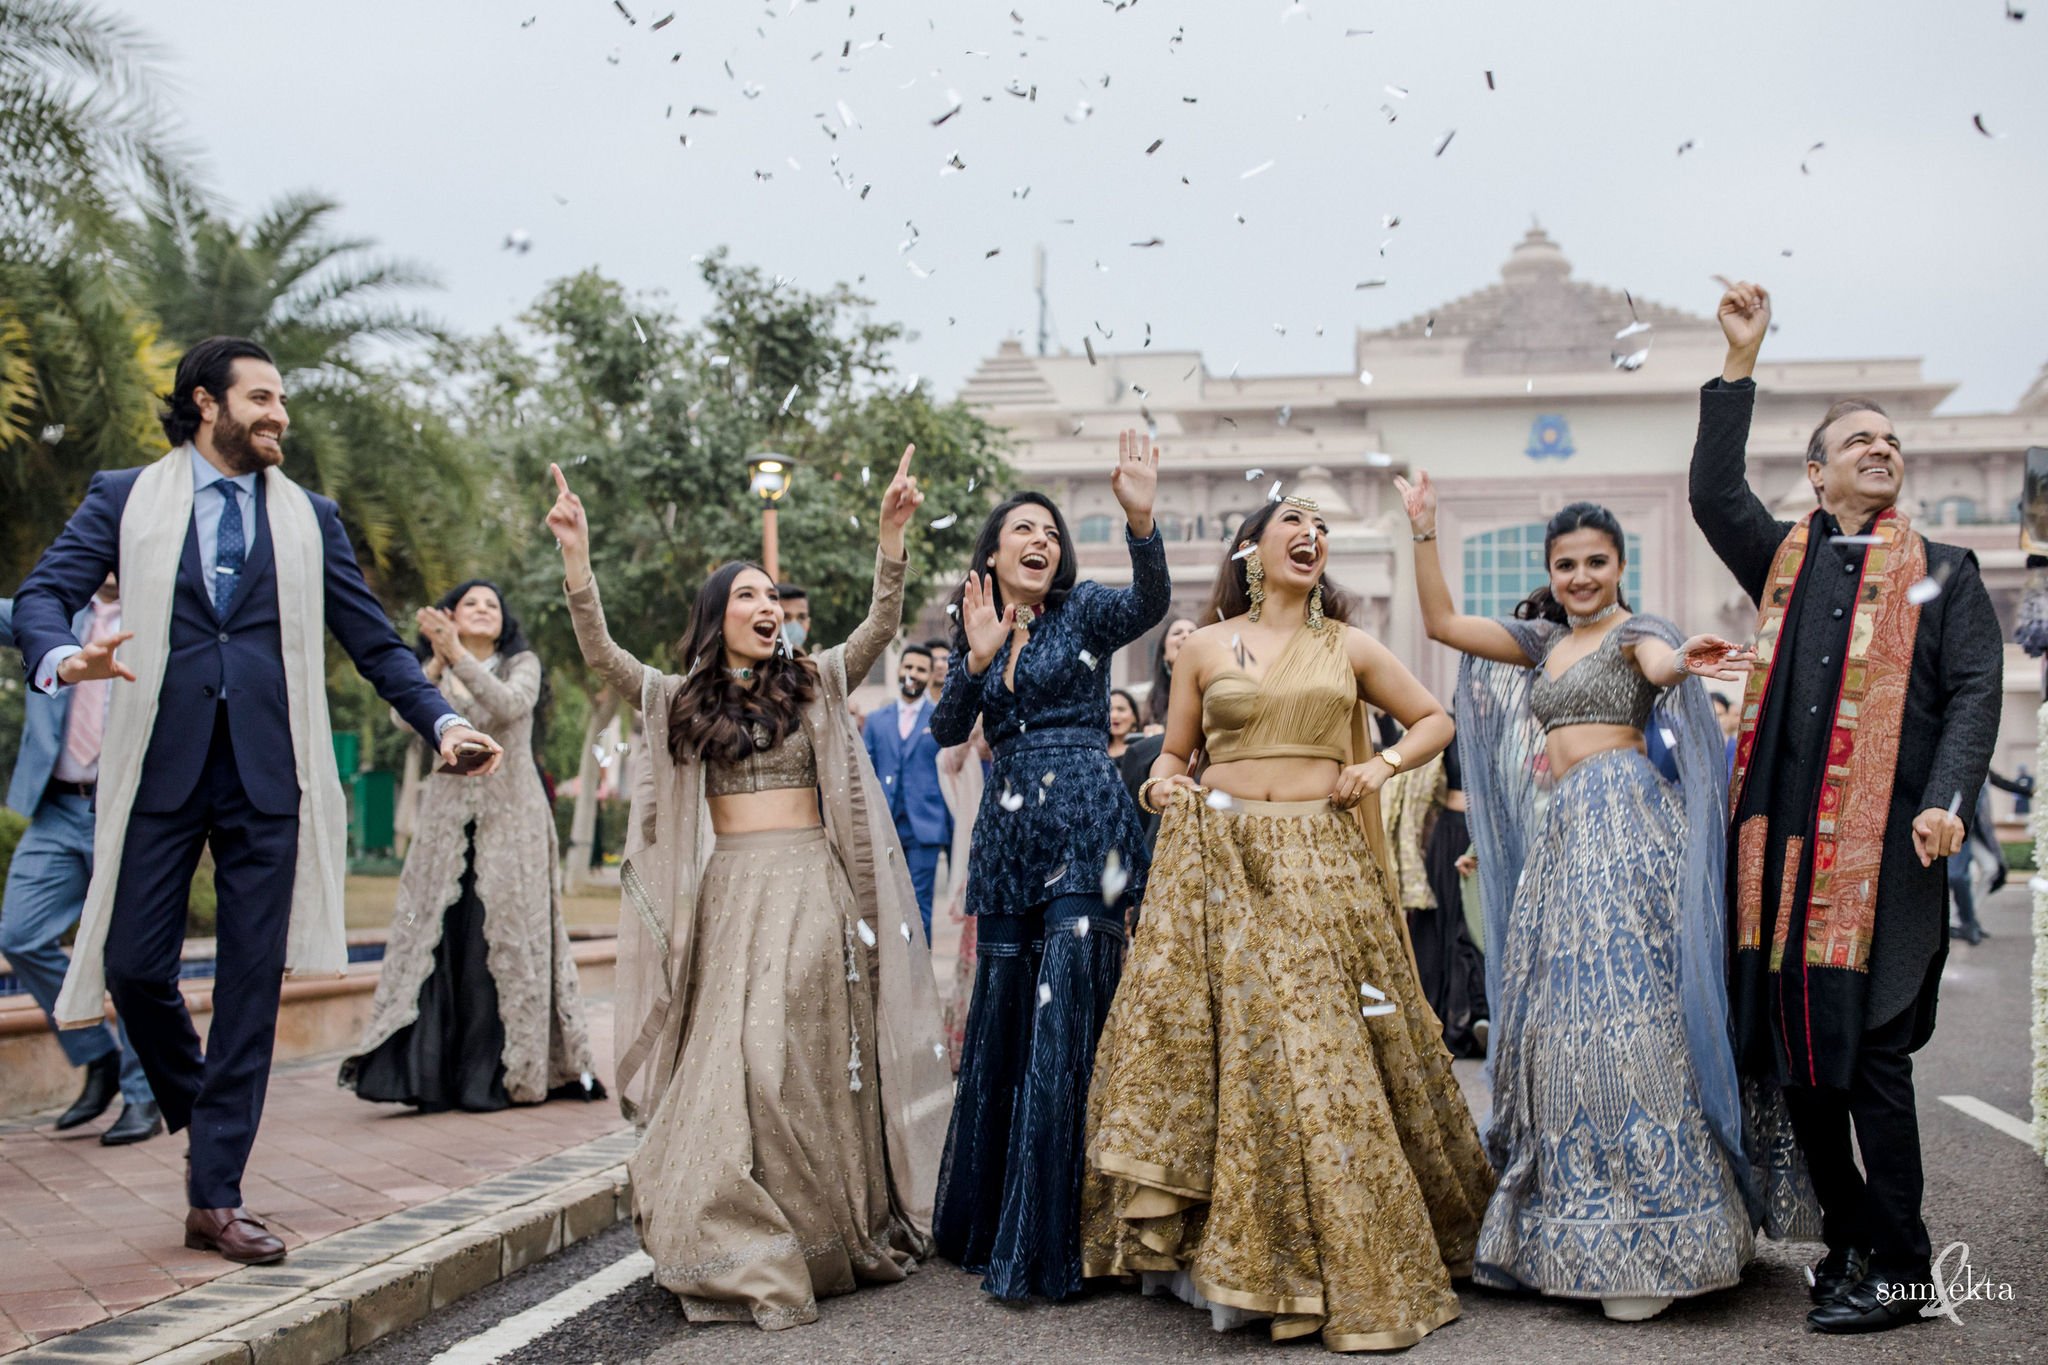 The bride squad approached the baraat